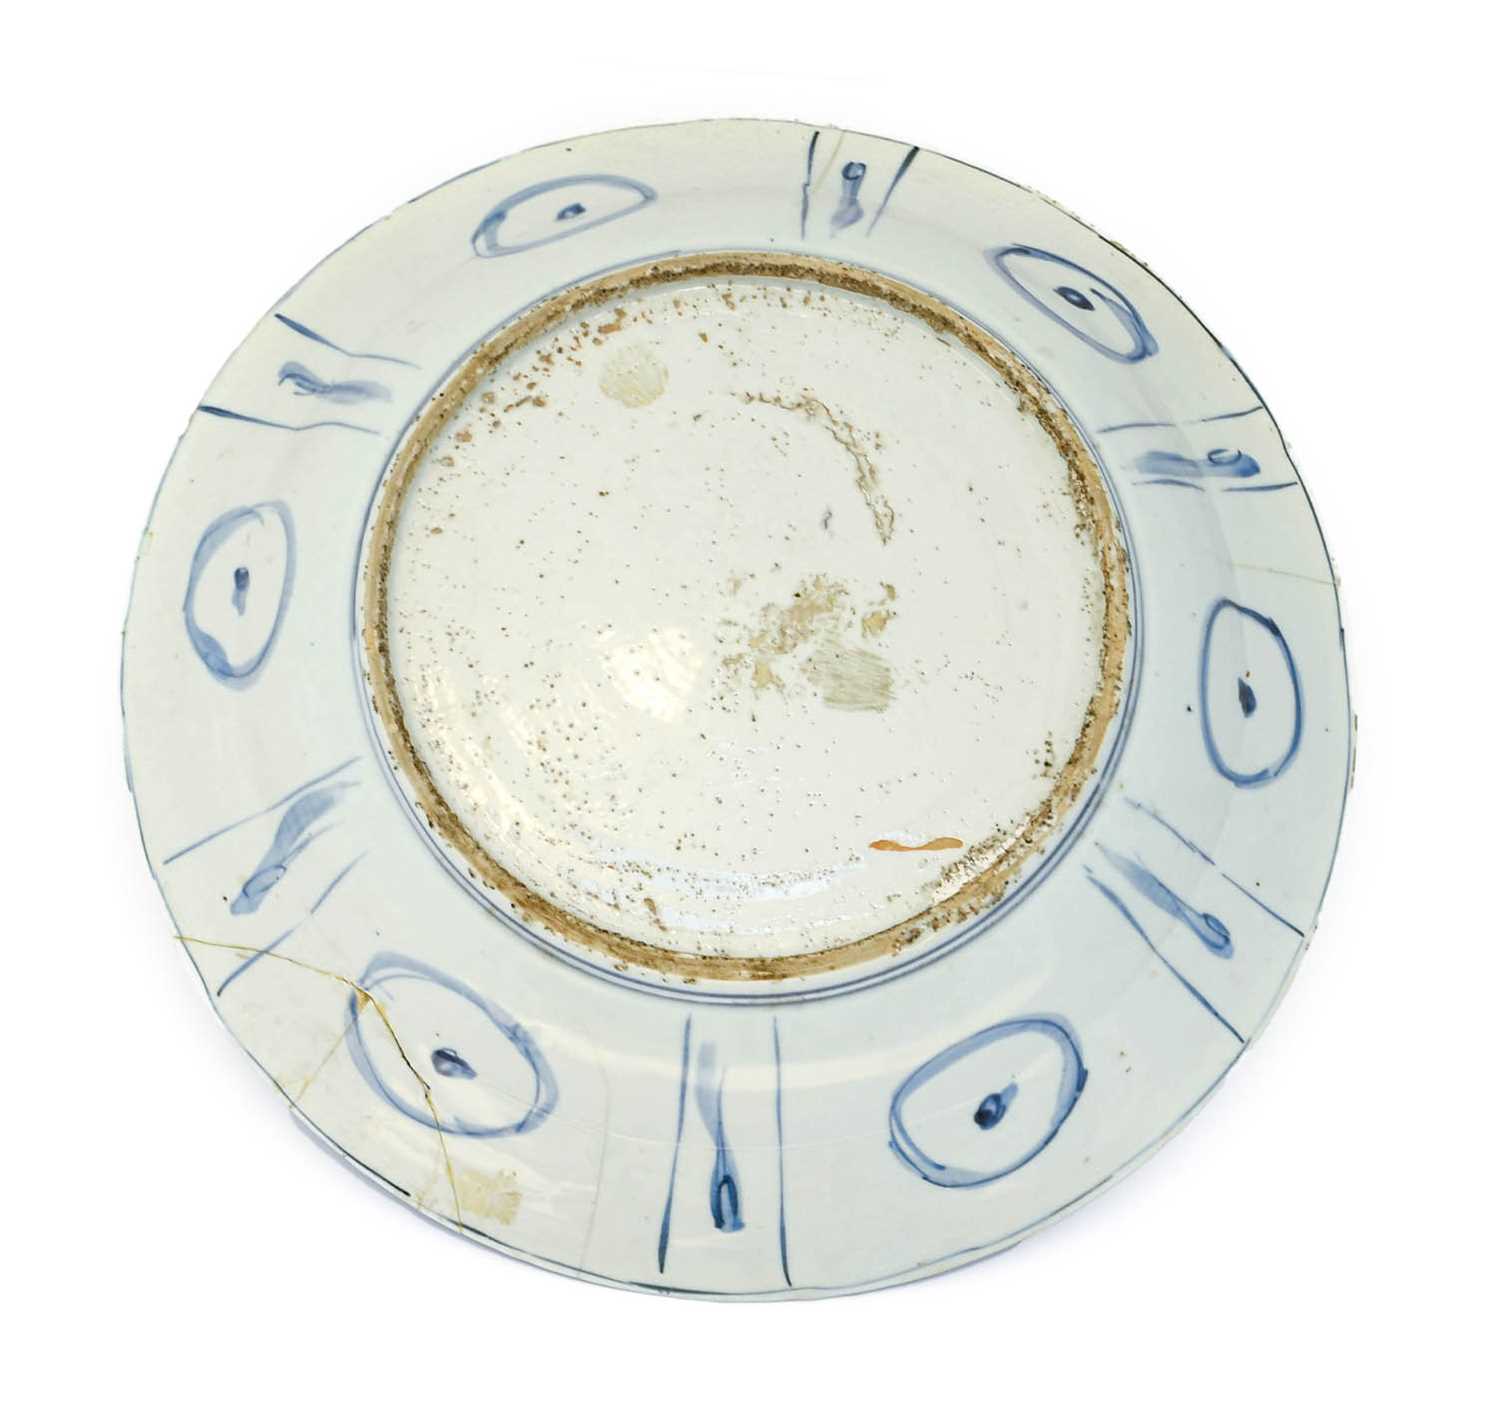 A Chinese Kraak Porcelain Dish, early 17th century, typically painted in underglaze blue with - Image 2 of 5